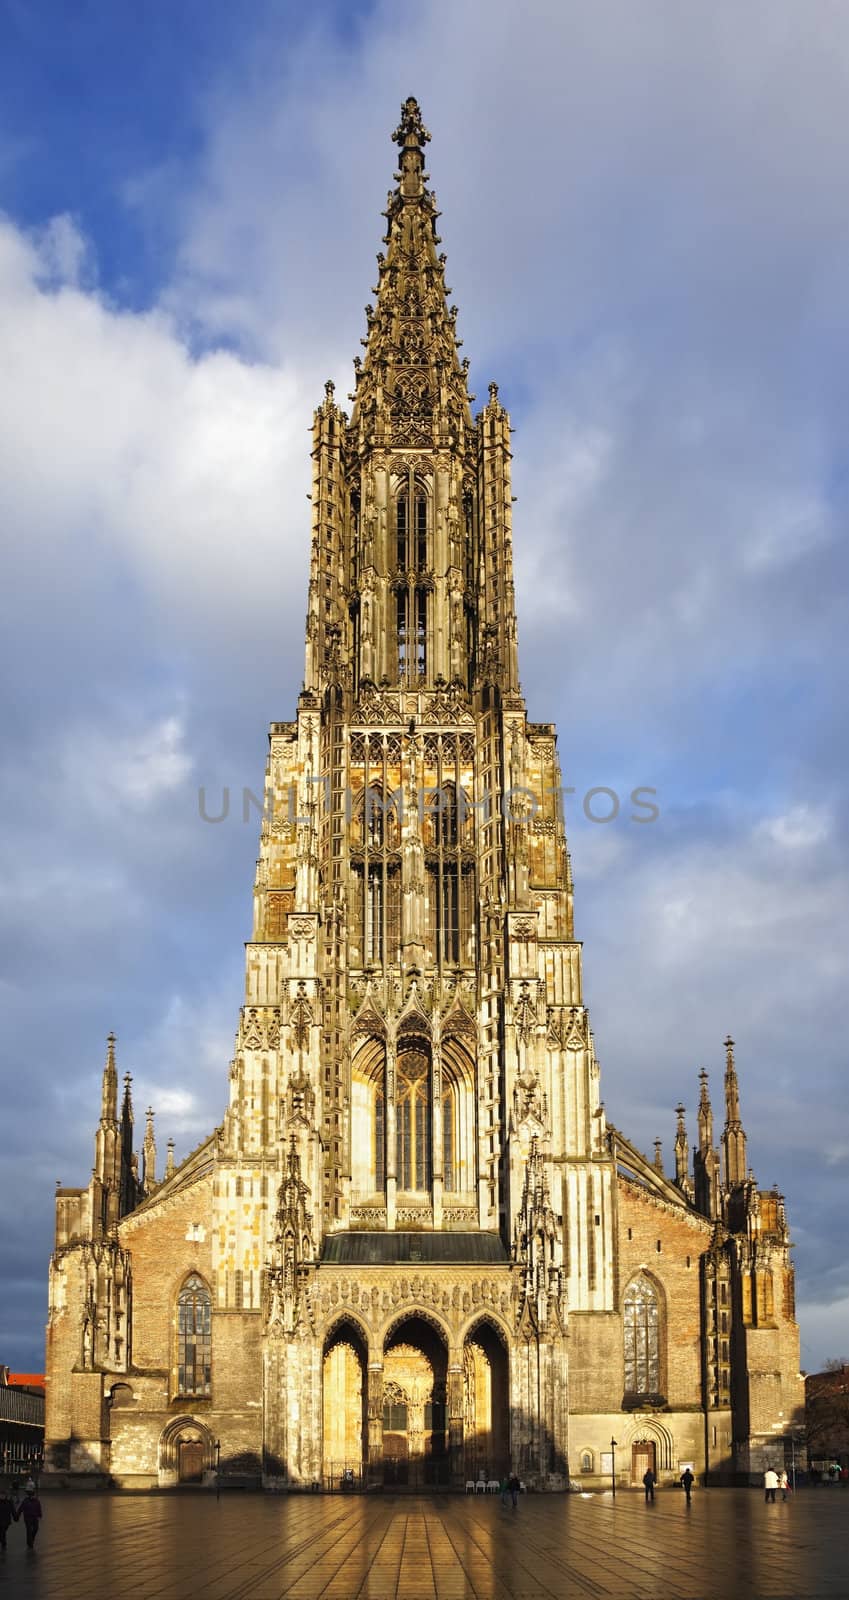 A photography of the beautiful church in Ulm Germany